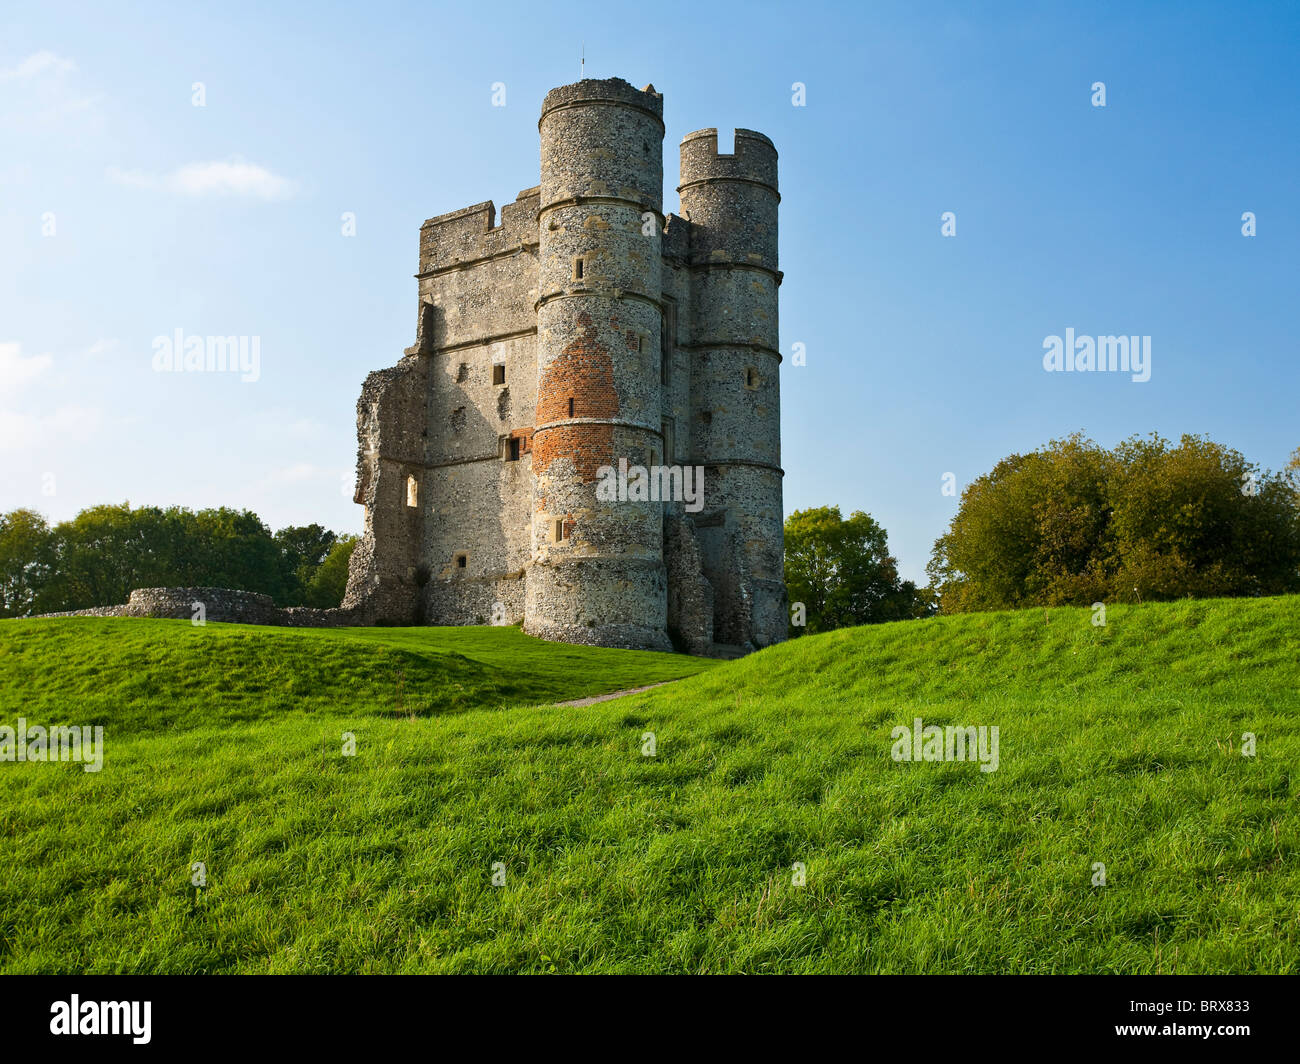 Ruins of Donnington Castle built in 1386 by Sir Richard Adderbury near Newbury Berkshire. Only the gatehouse remains Stock Photo